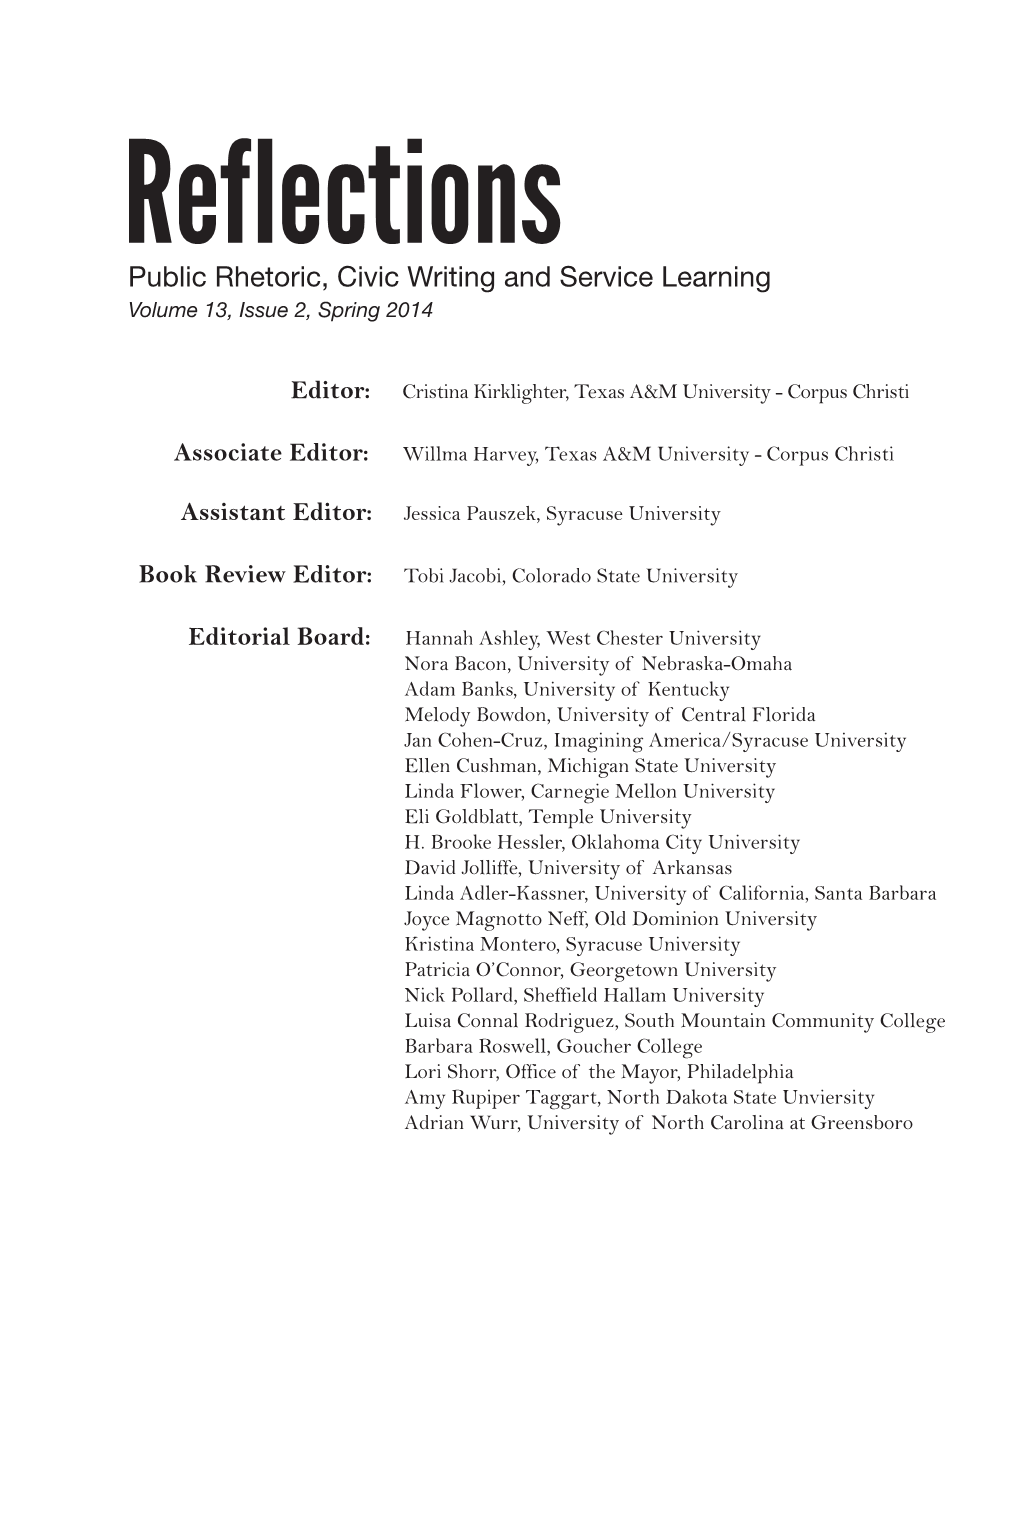 Reflections Public Rhetoric, Civic Writing and Service Learning Volume 13, Issue 2, Spring 2014